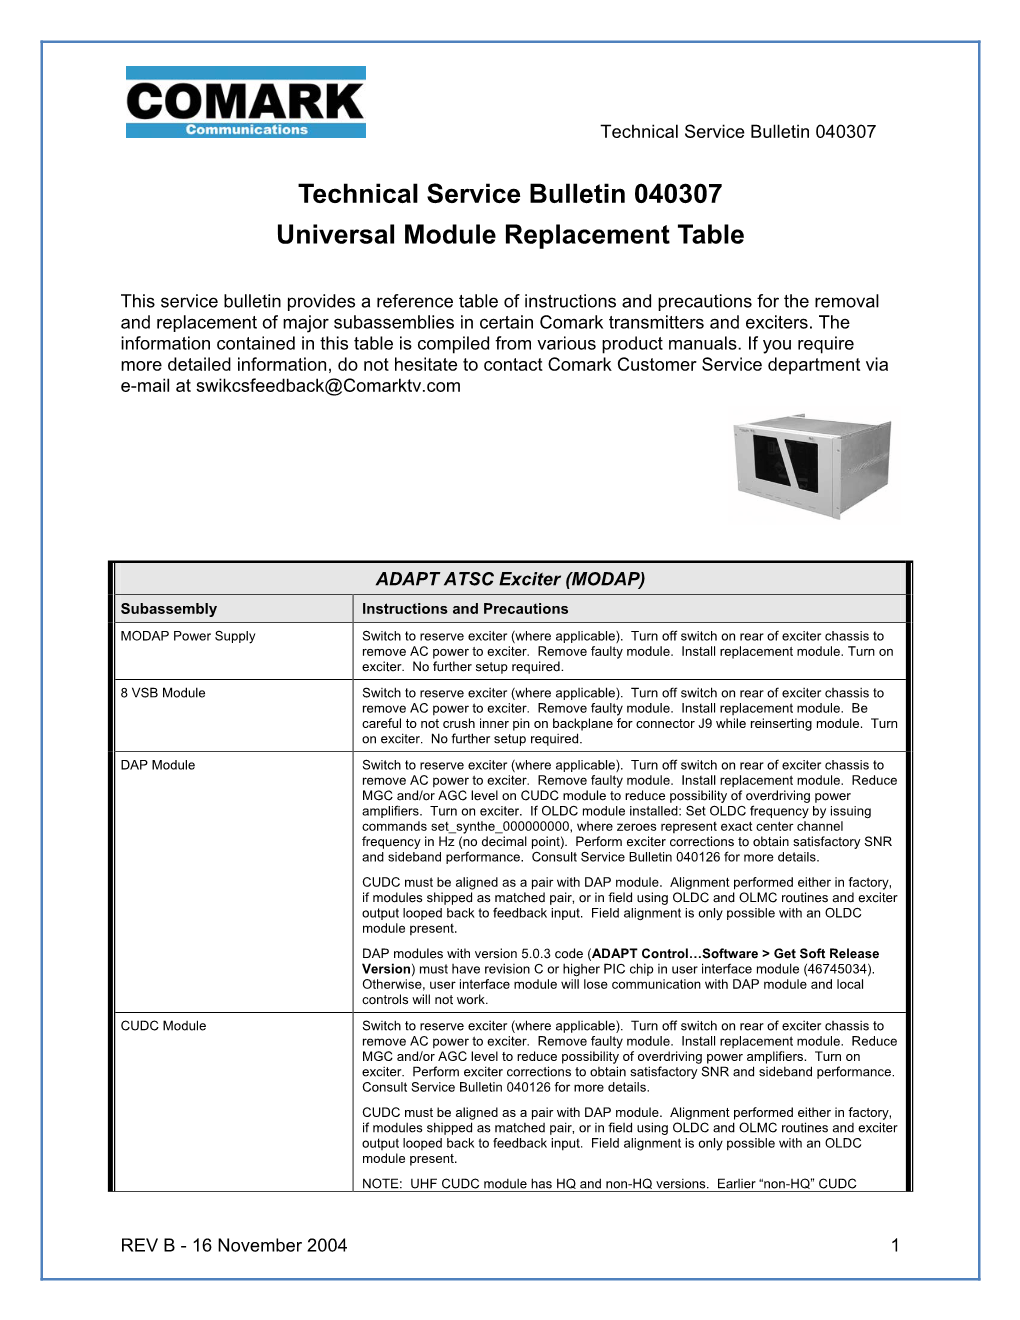 Technical Service Bulletin 040307 Universal Module Replacement Table